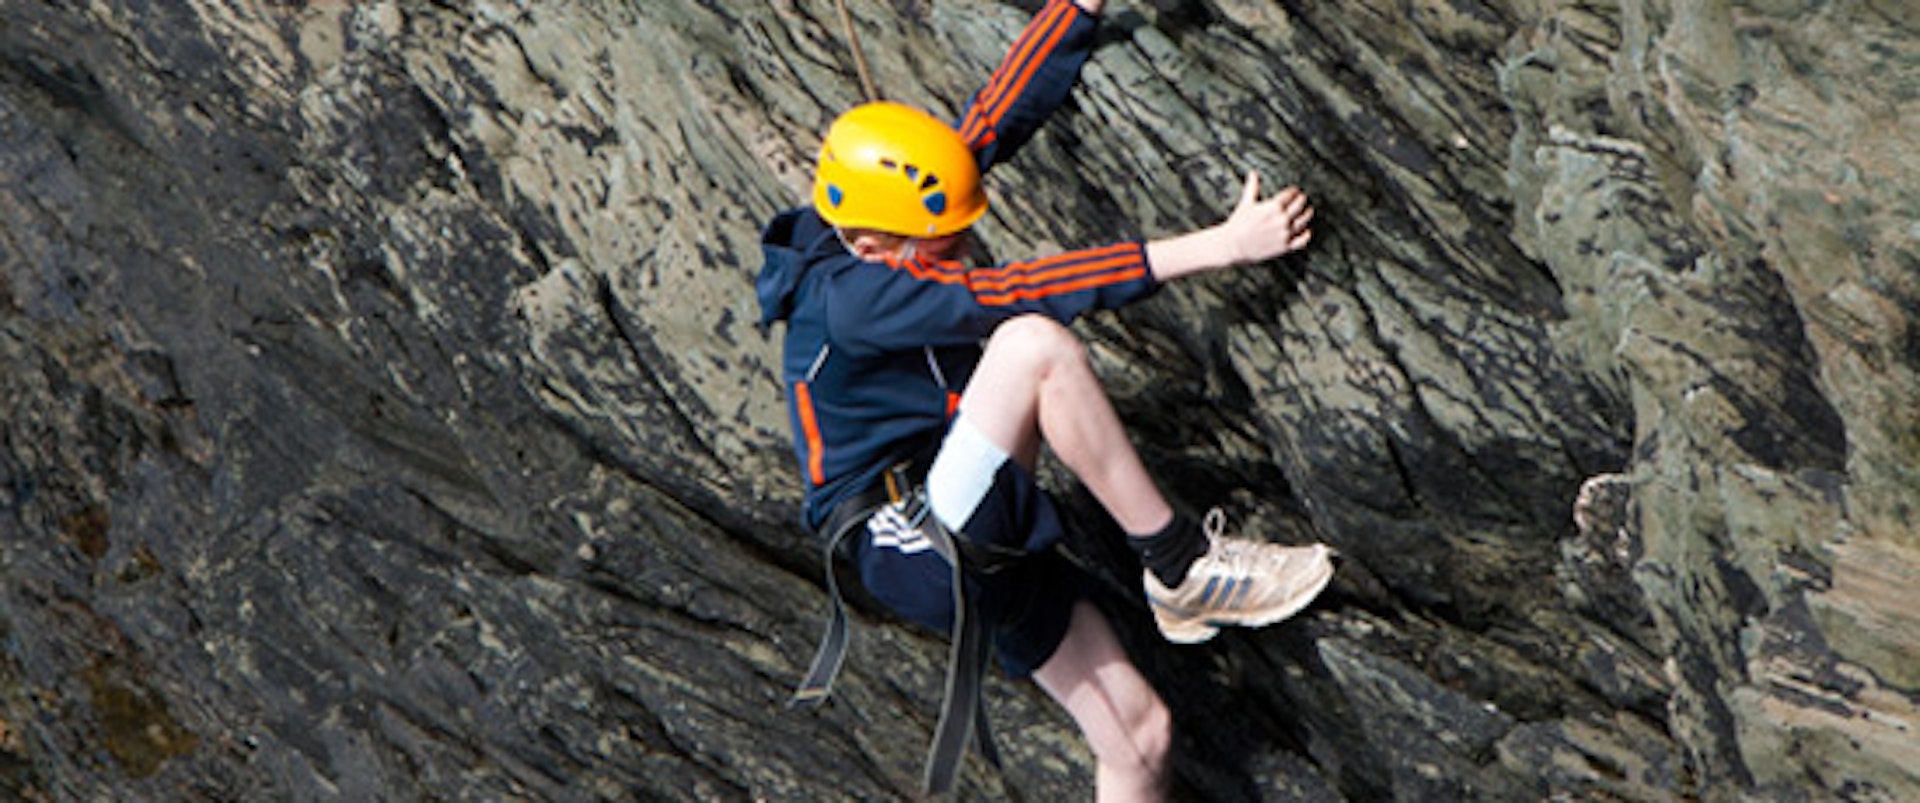 Abseiling & Climbing Experiences